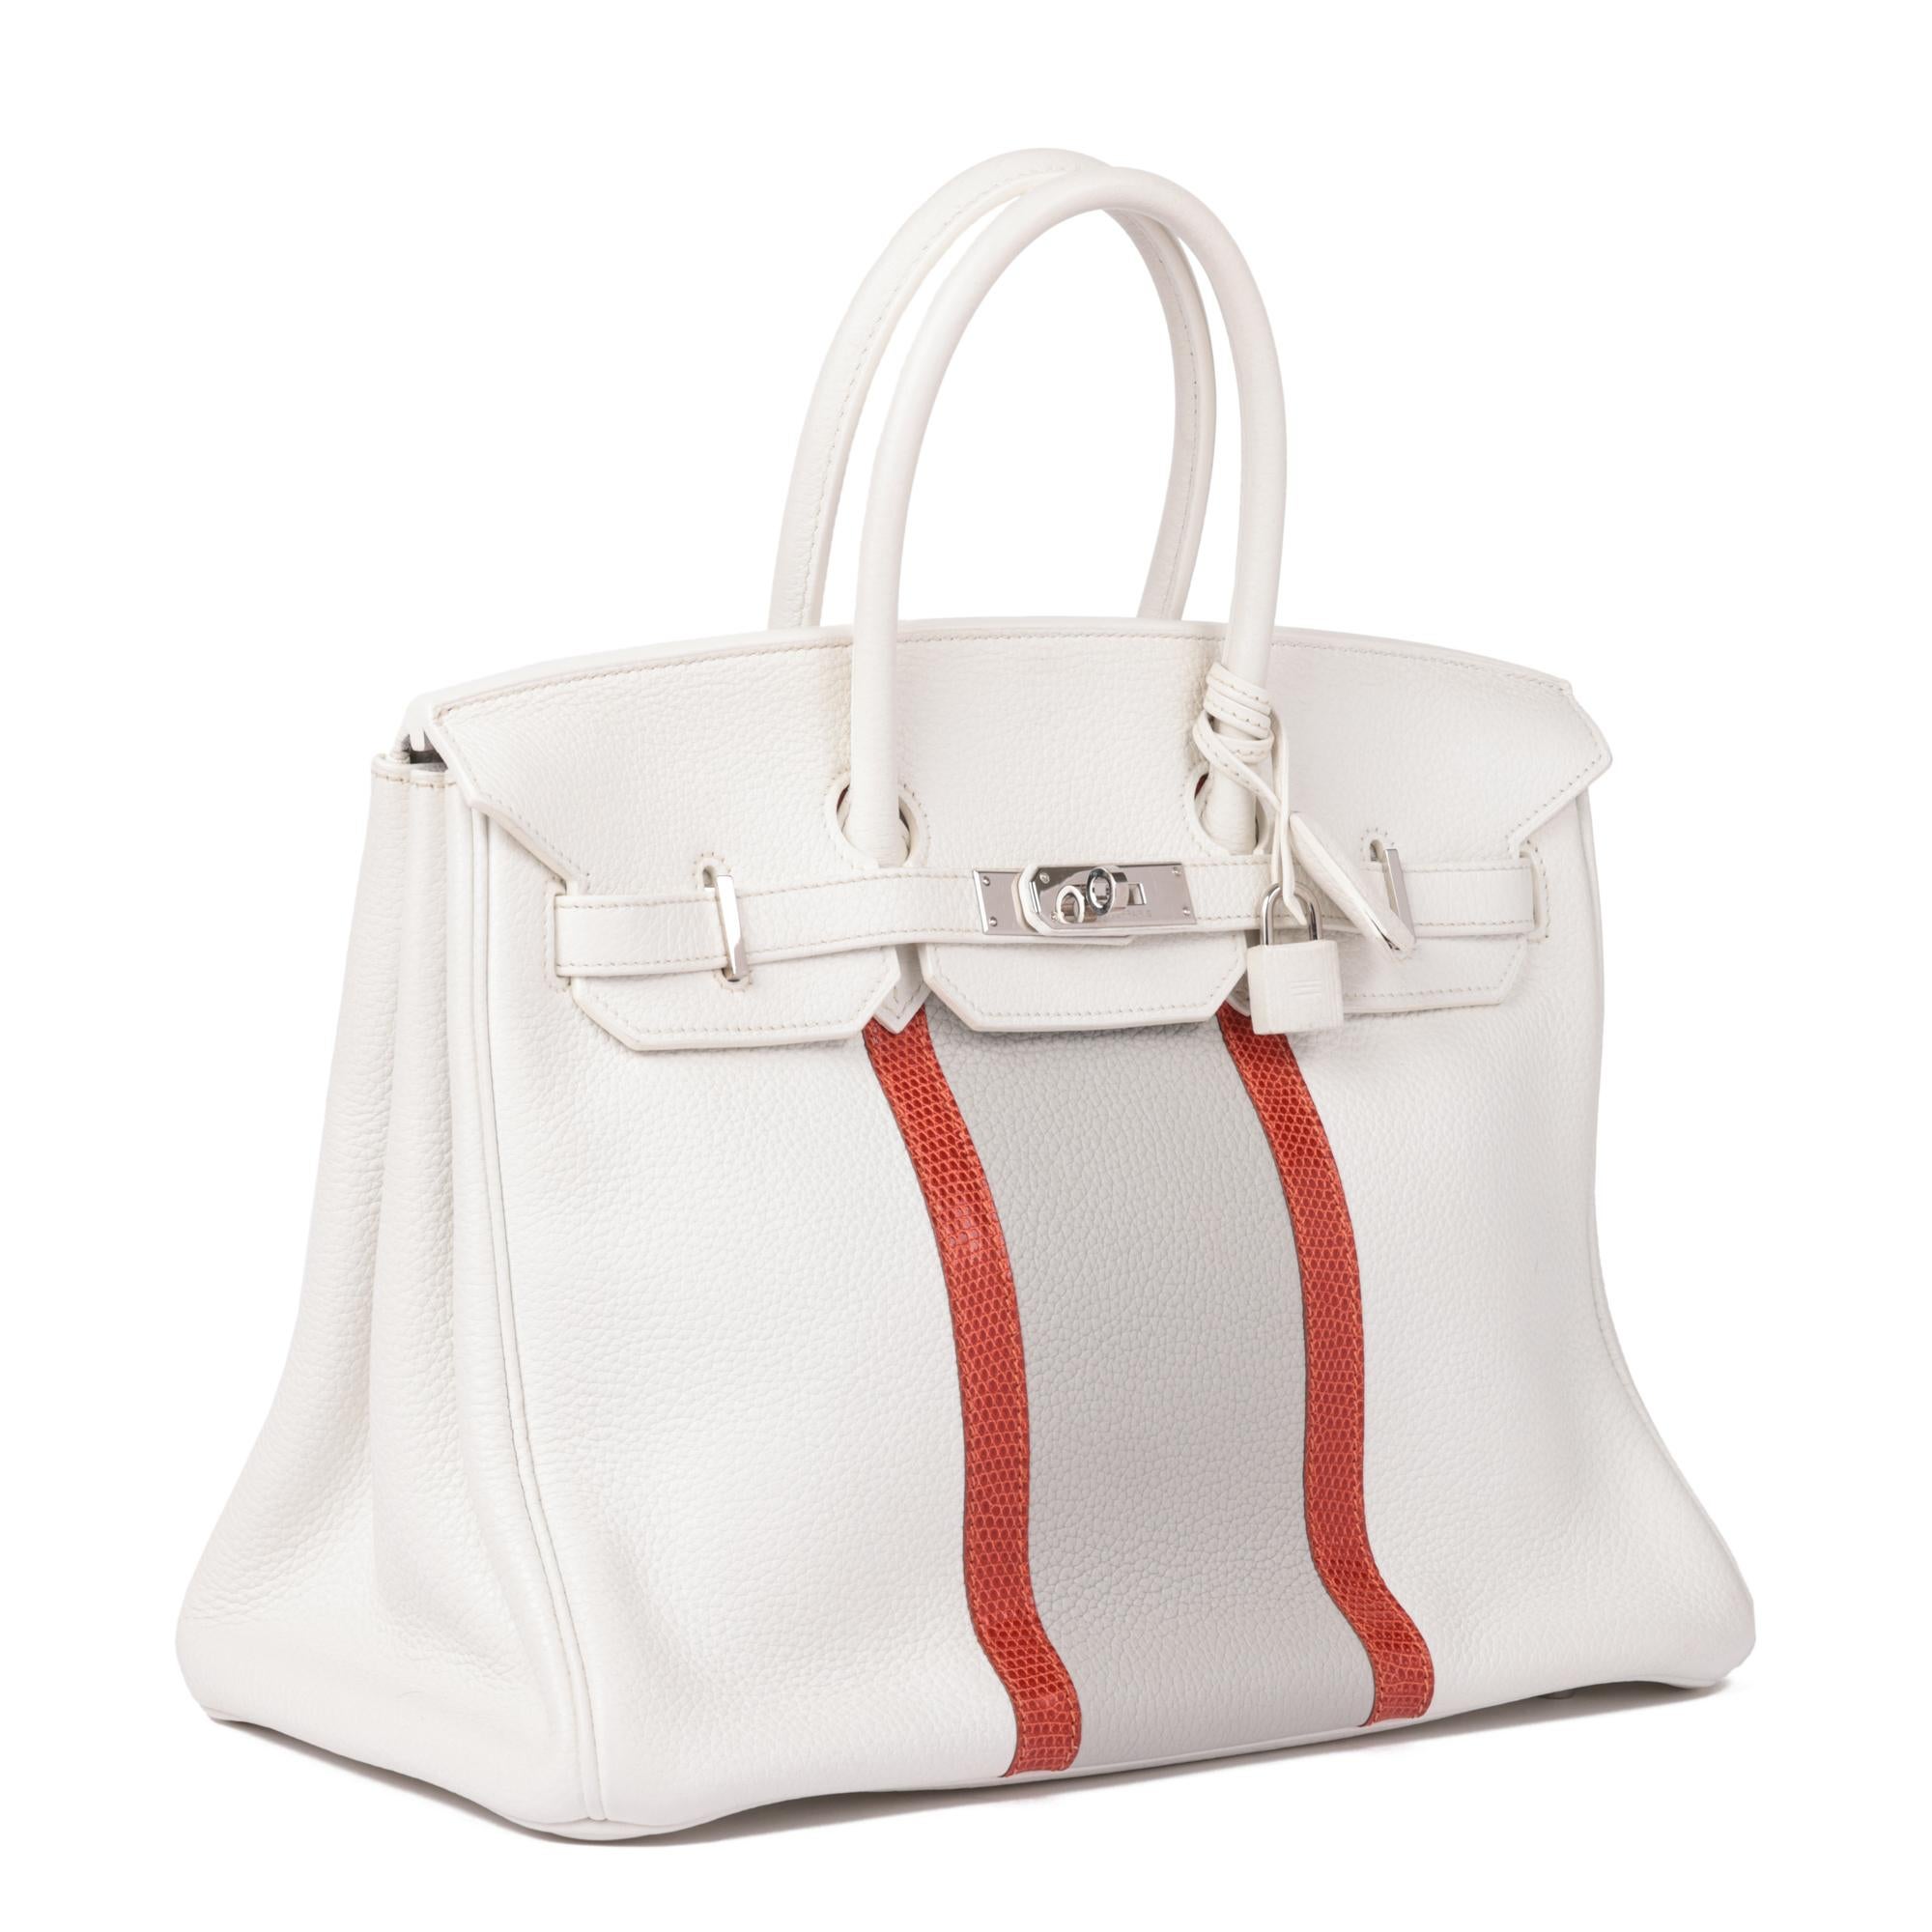 Hermès Blanc, Gris Perle Clemence Leather & Sanguine Niloticus Lizard Leather Club Birkin 35cm Retourne

CONDITION NOTES
The exterior is in excellent condition with minimal signs of use.
The interior is in excellent condition with minimal signs of